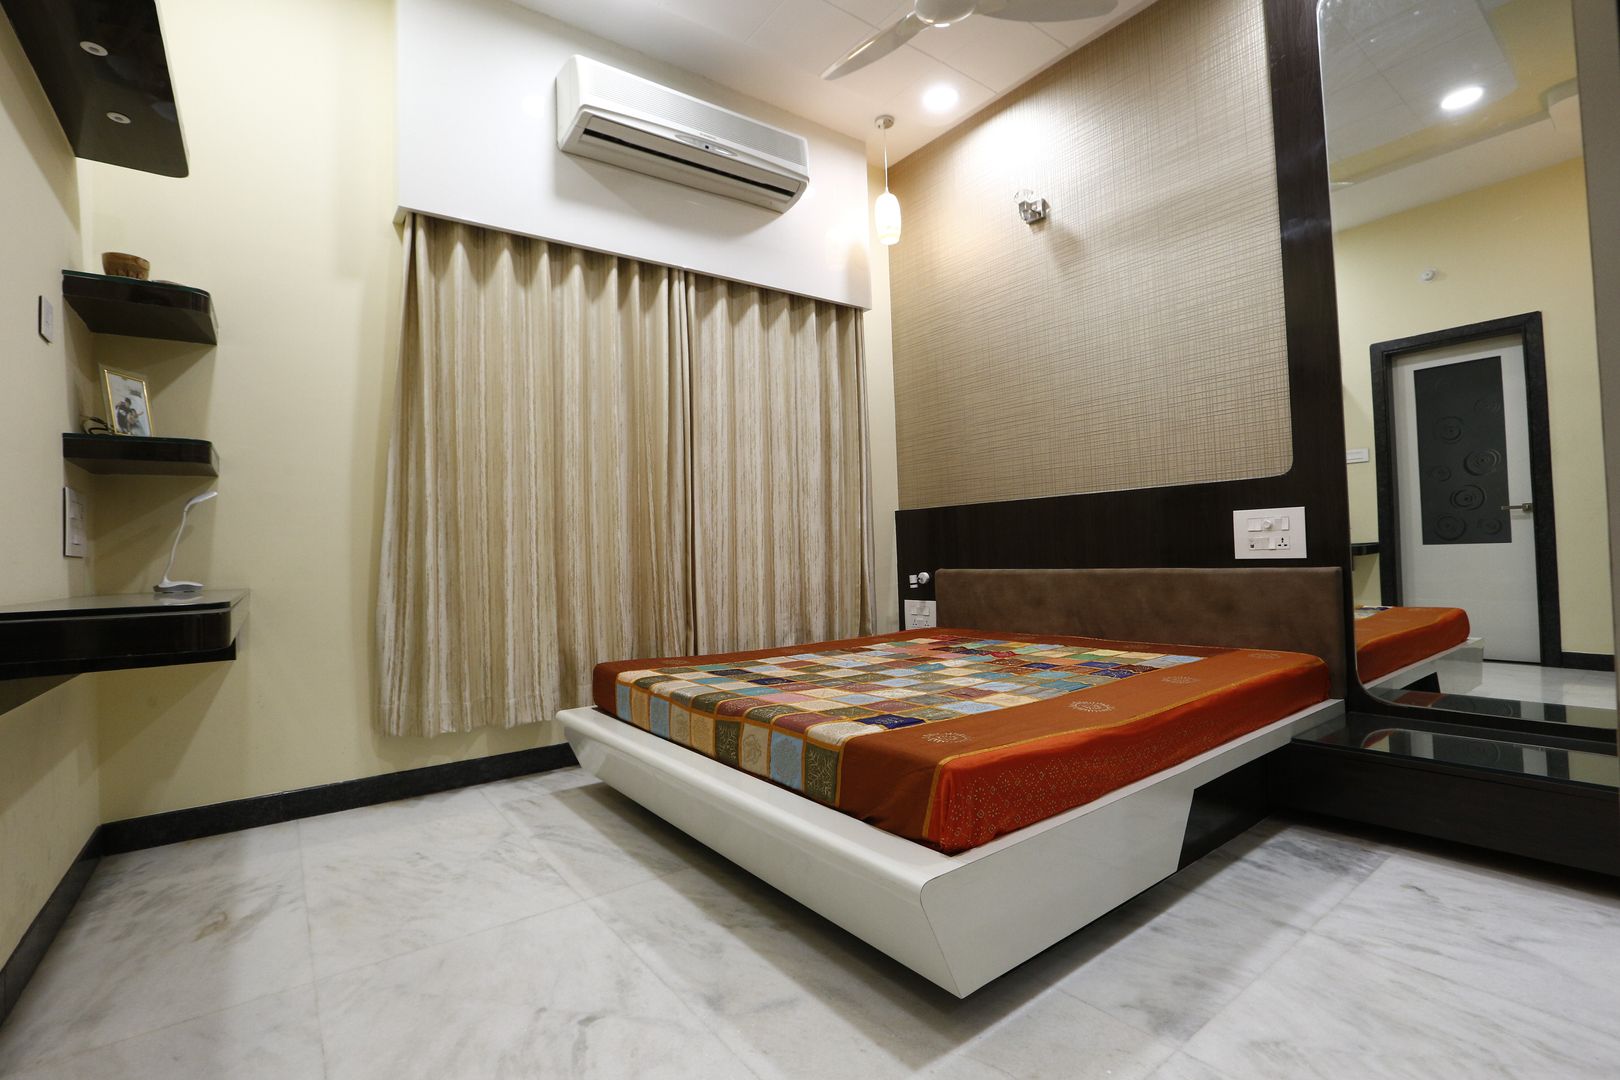 Guest Room RAVI - NUPUR ARCHITECTS Modern style bedroom